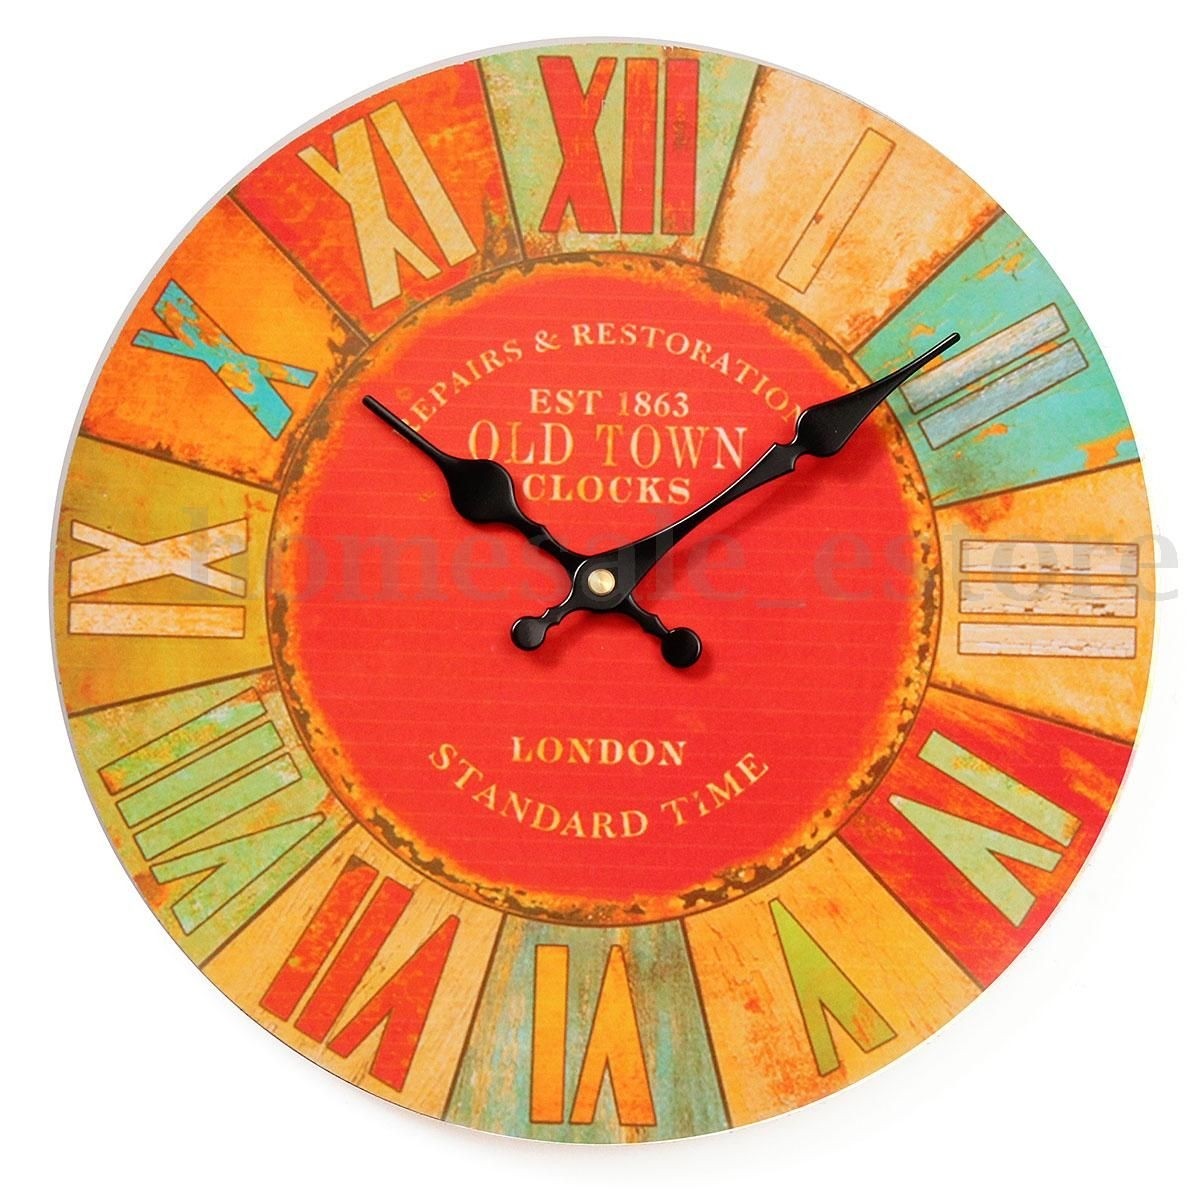 Details about large vintage rustic wooden wall clock